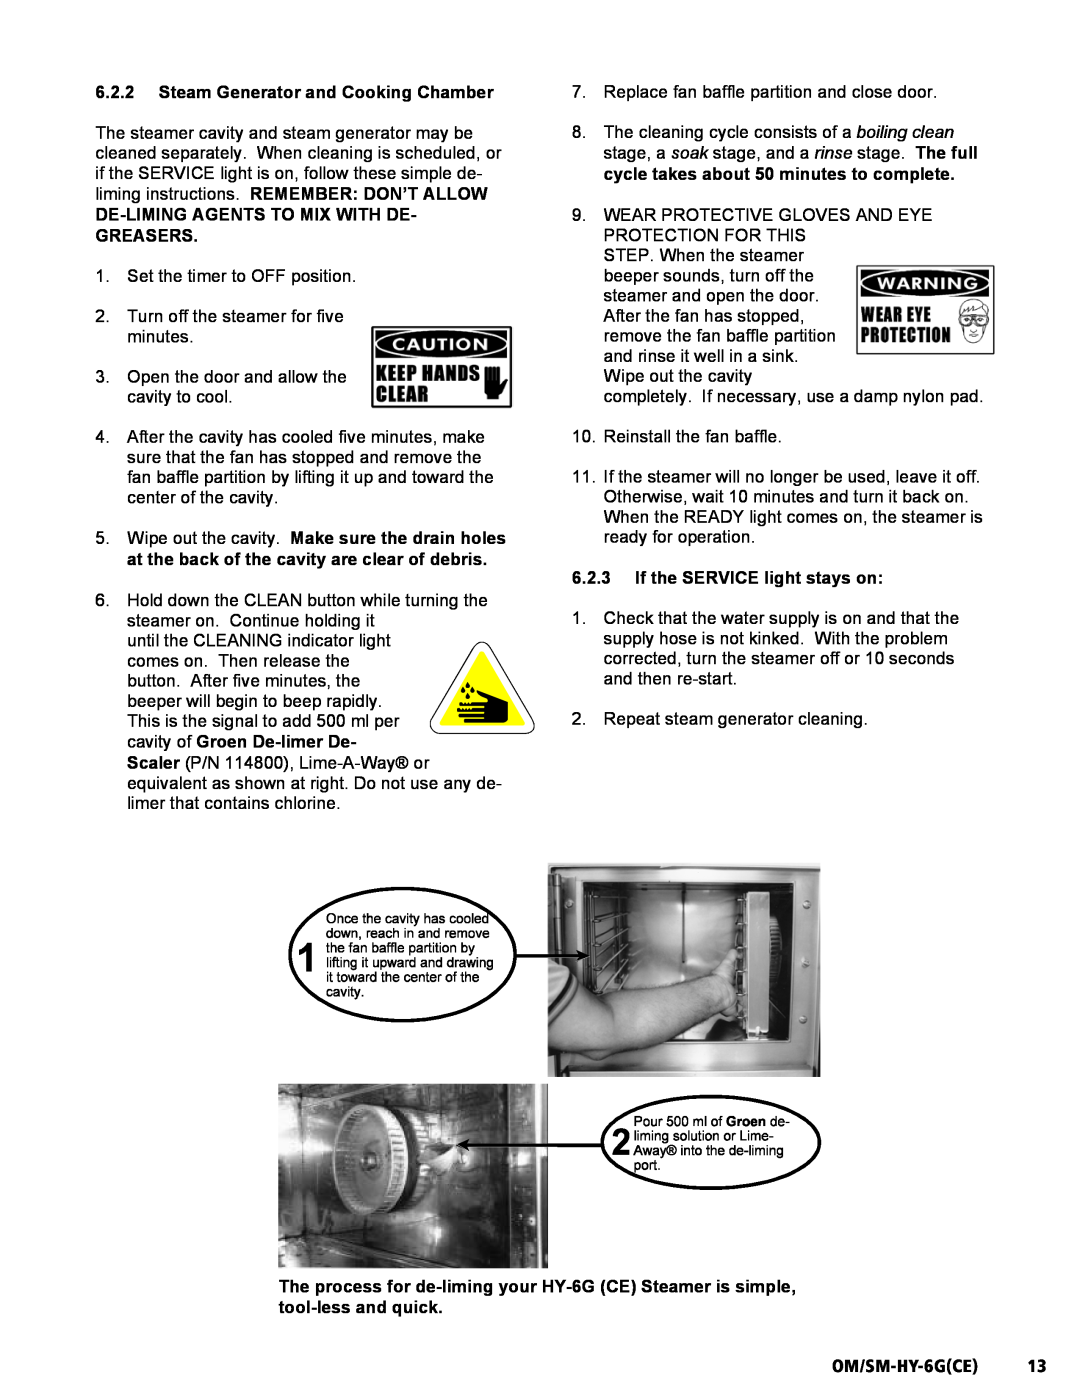 Unified Brands HY-6G(CE) service manual 6.2.2Steam Generator and Cooking Chamber, De-Limingagents To Mix With De- Greasers 